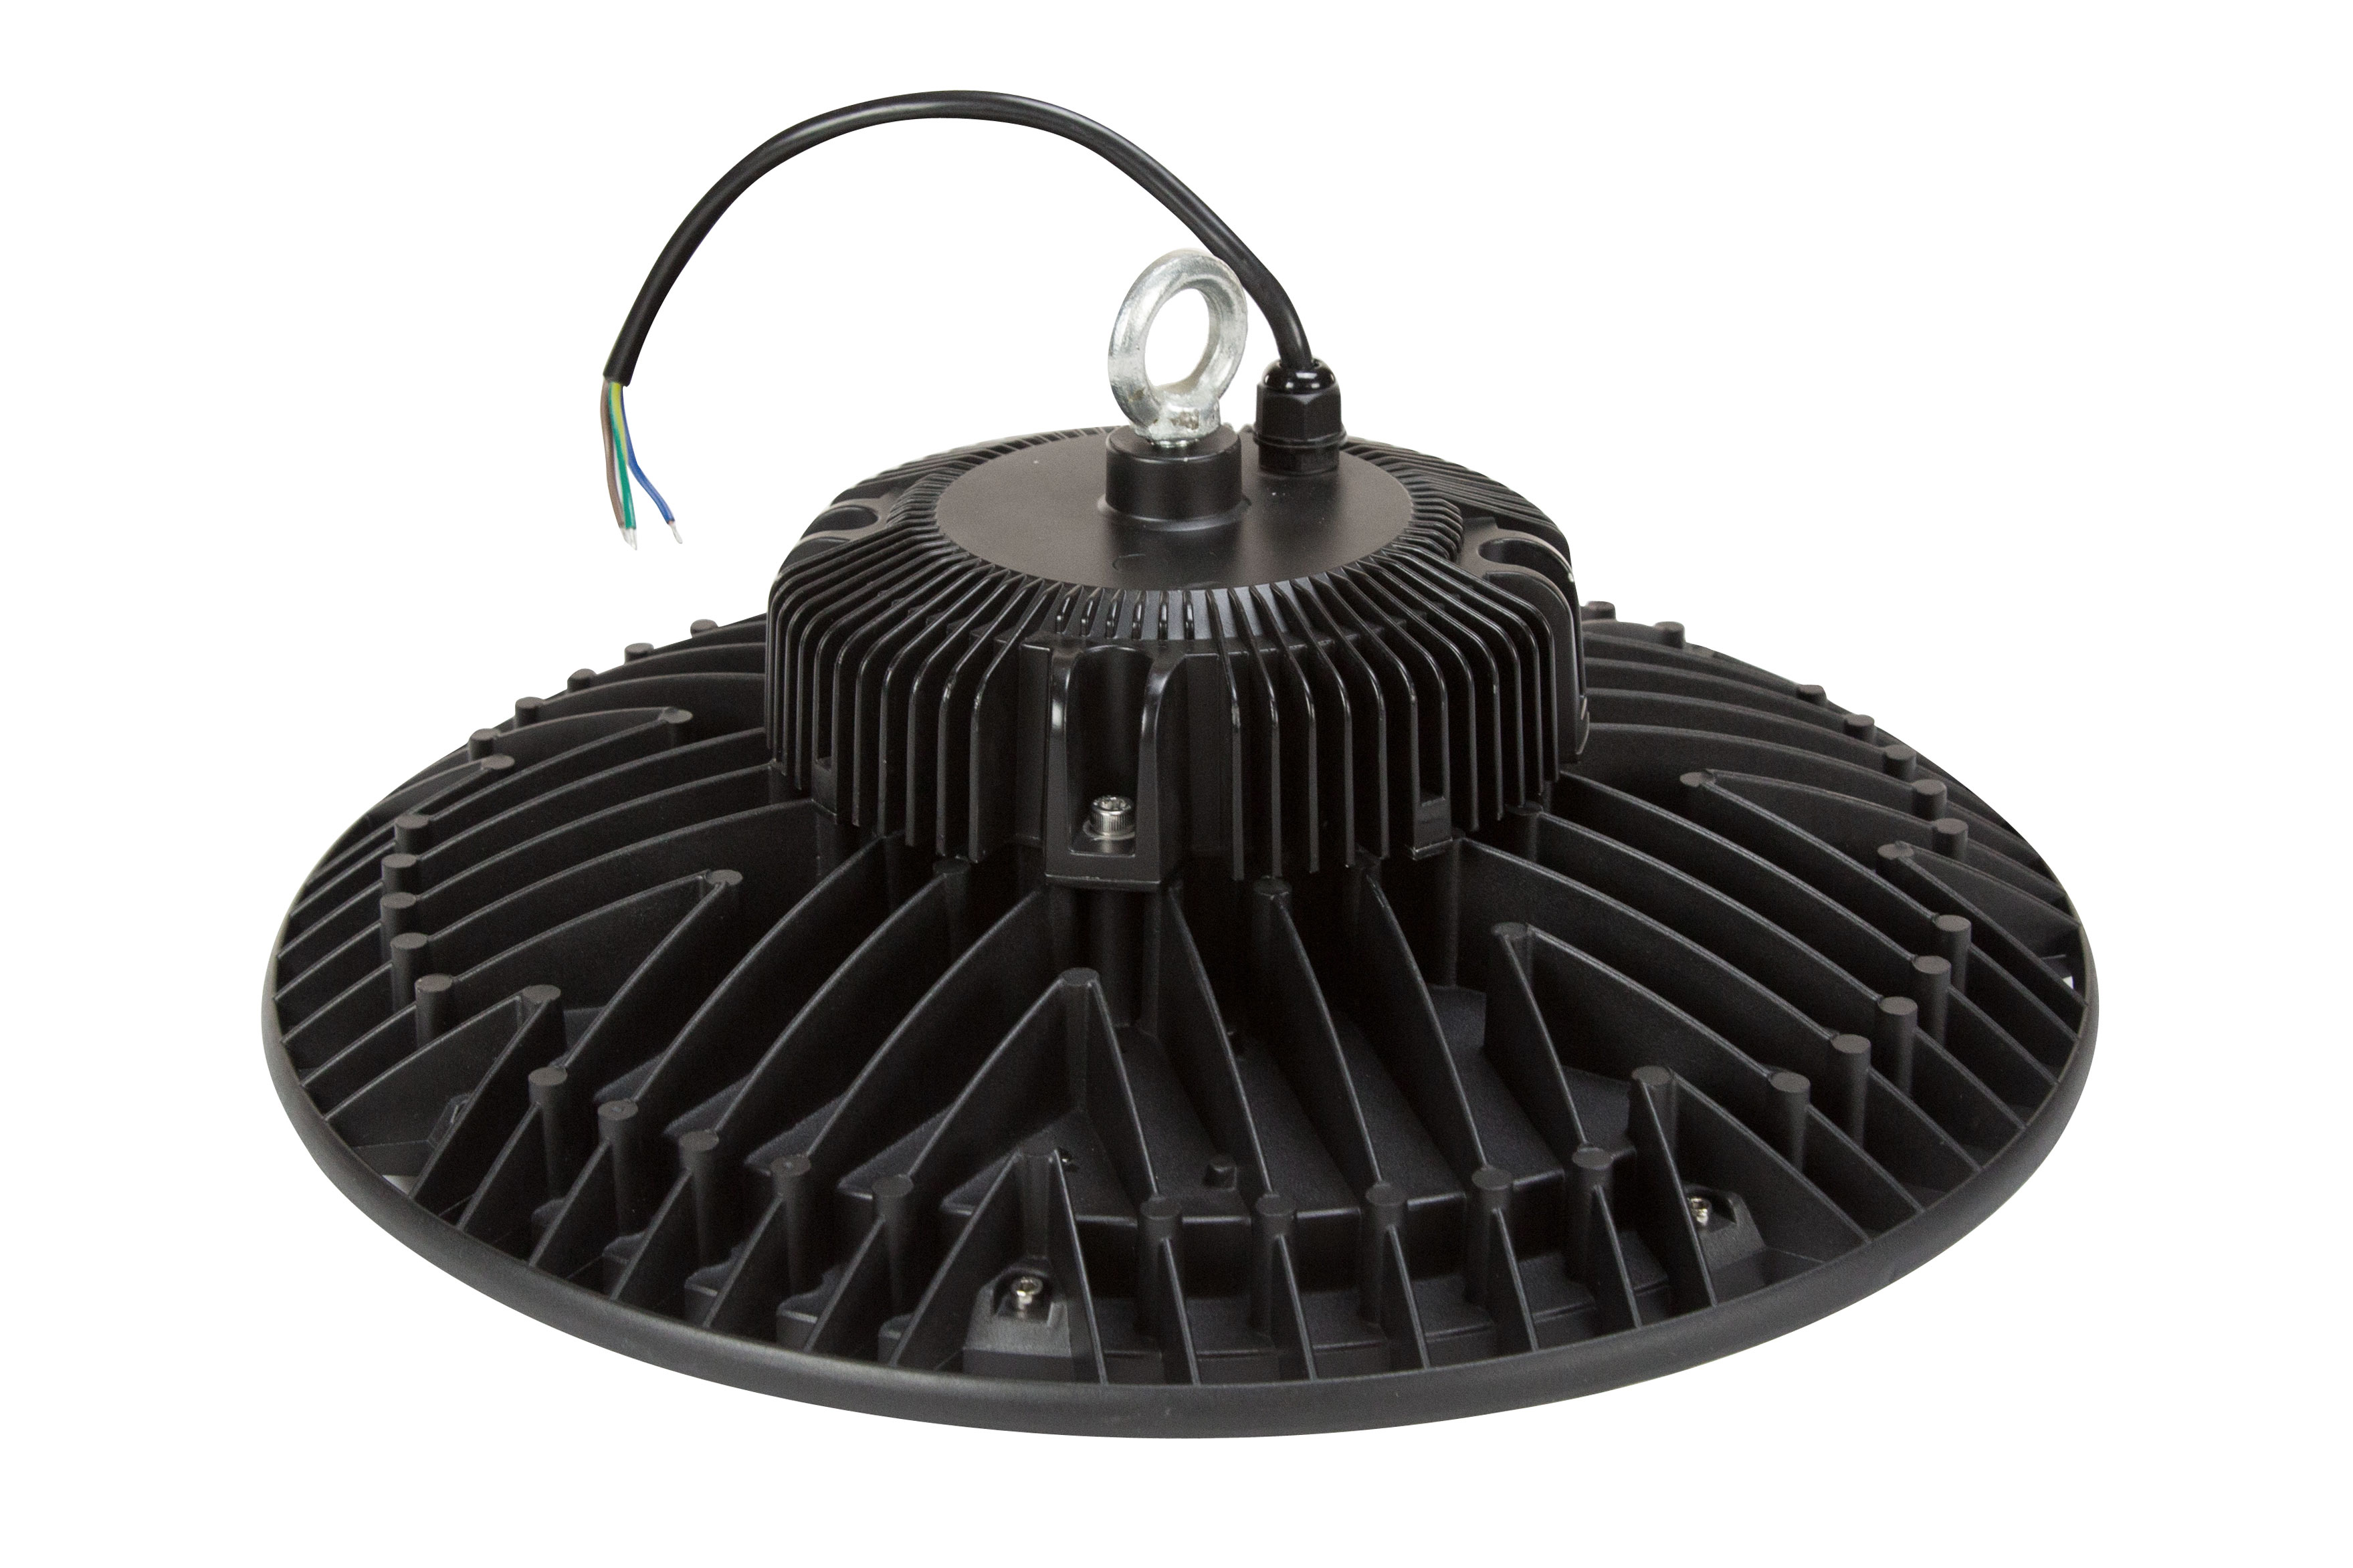 Larson Electronics Releases a New 200 Watt General Area High Bay LED